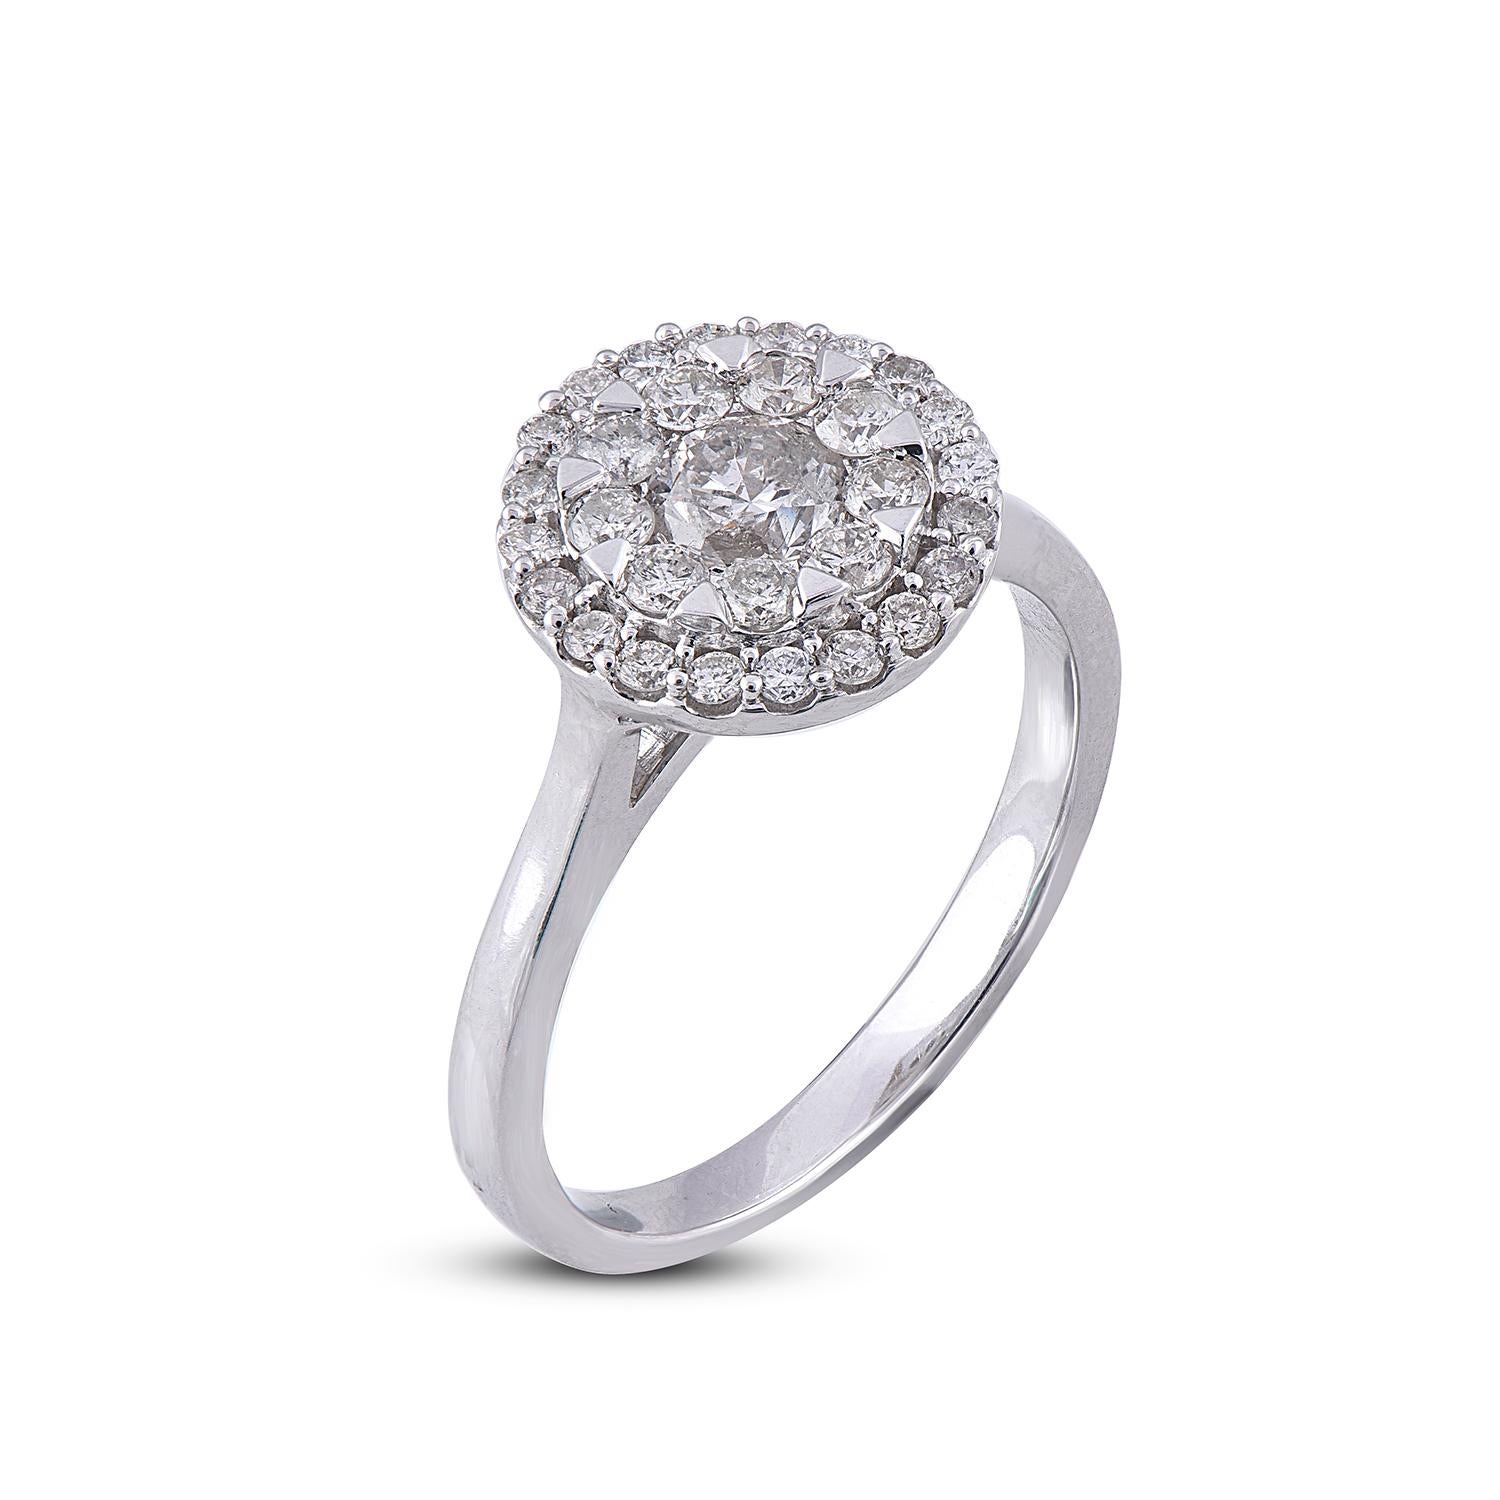 You'll adore the petite touch of shimmer these diamond engagement ring add to your attire. Beautifully hand-crafted by our inhouse experts in 14 karat White gold and embellished with 30 round diamonds set in prong setting and shimmers with H-I color